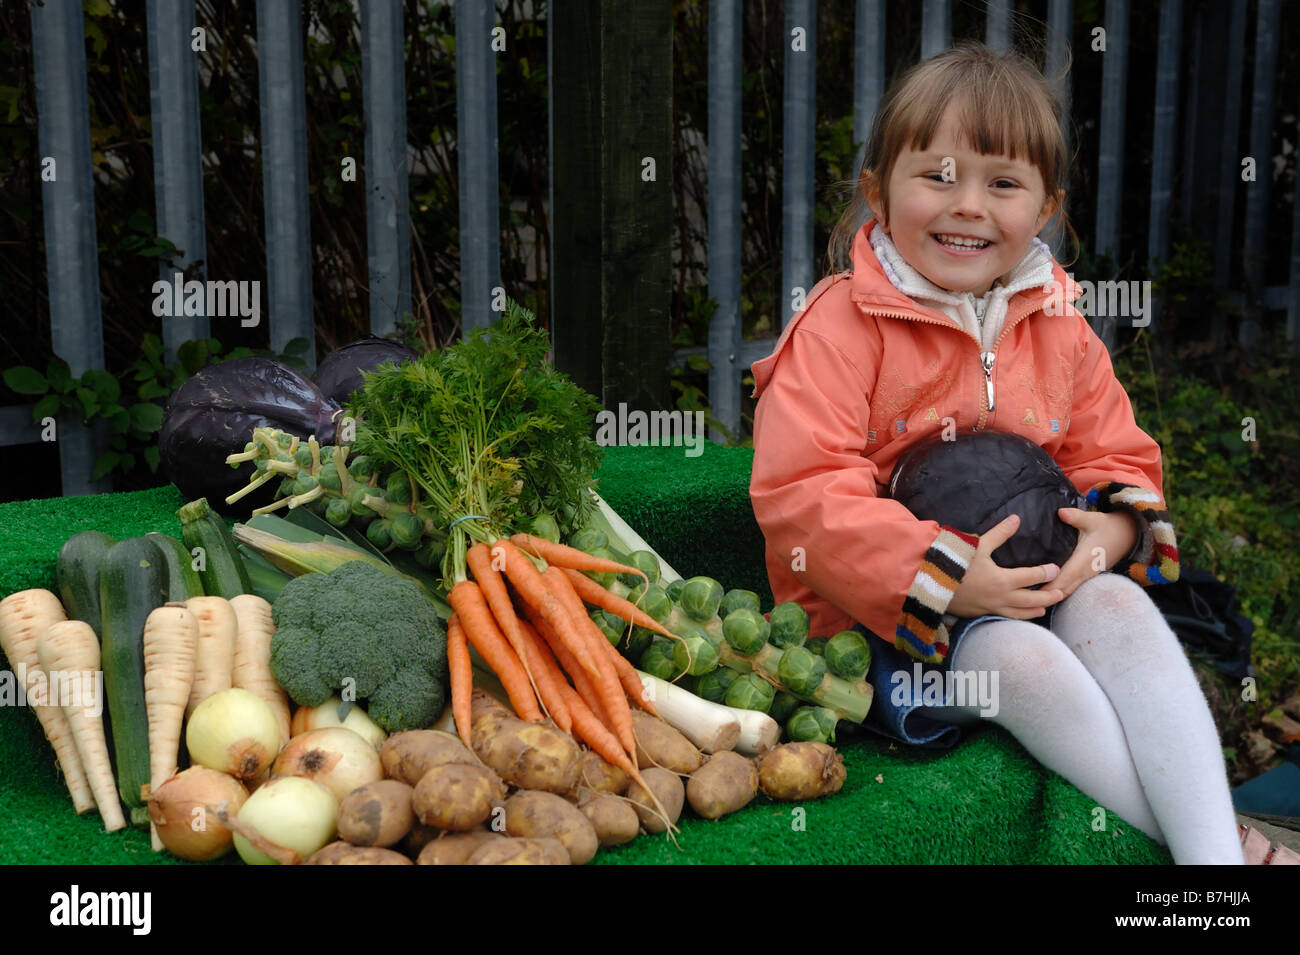 Child with a variety of garden vegetables Stock Photo